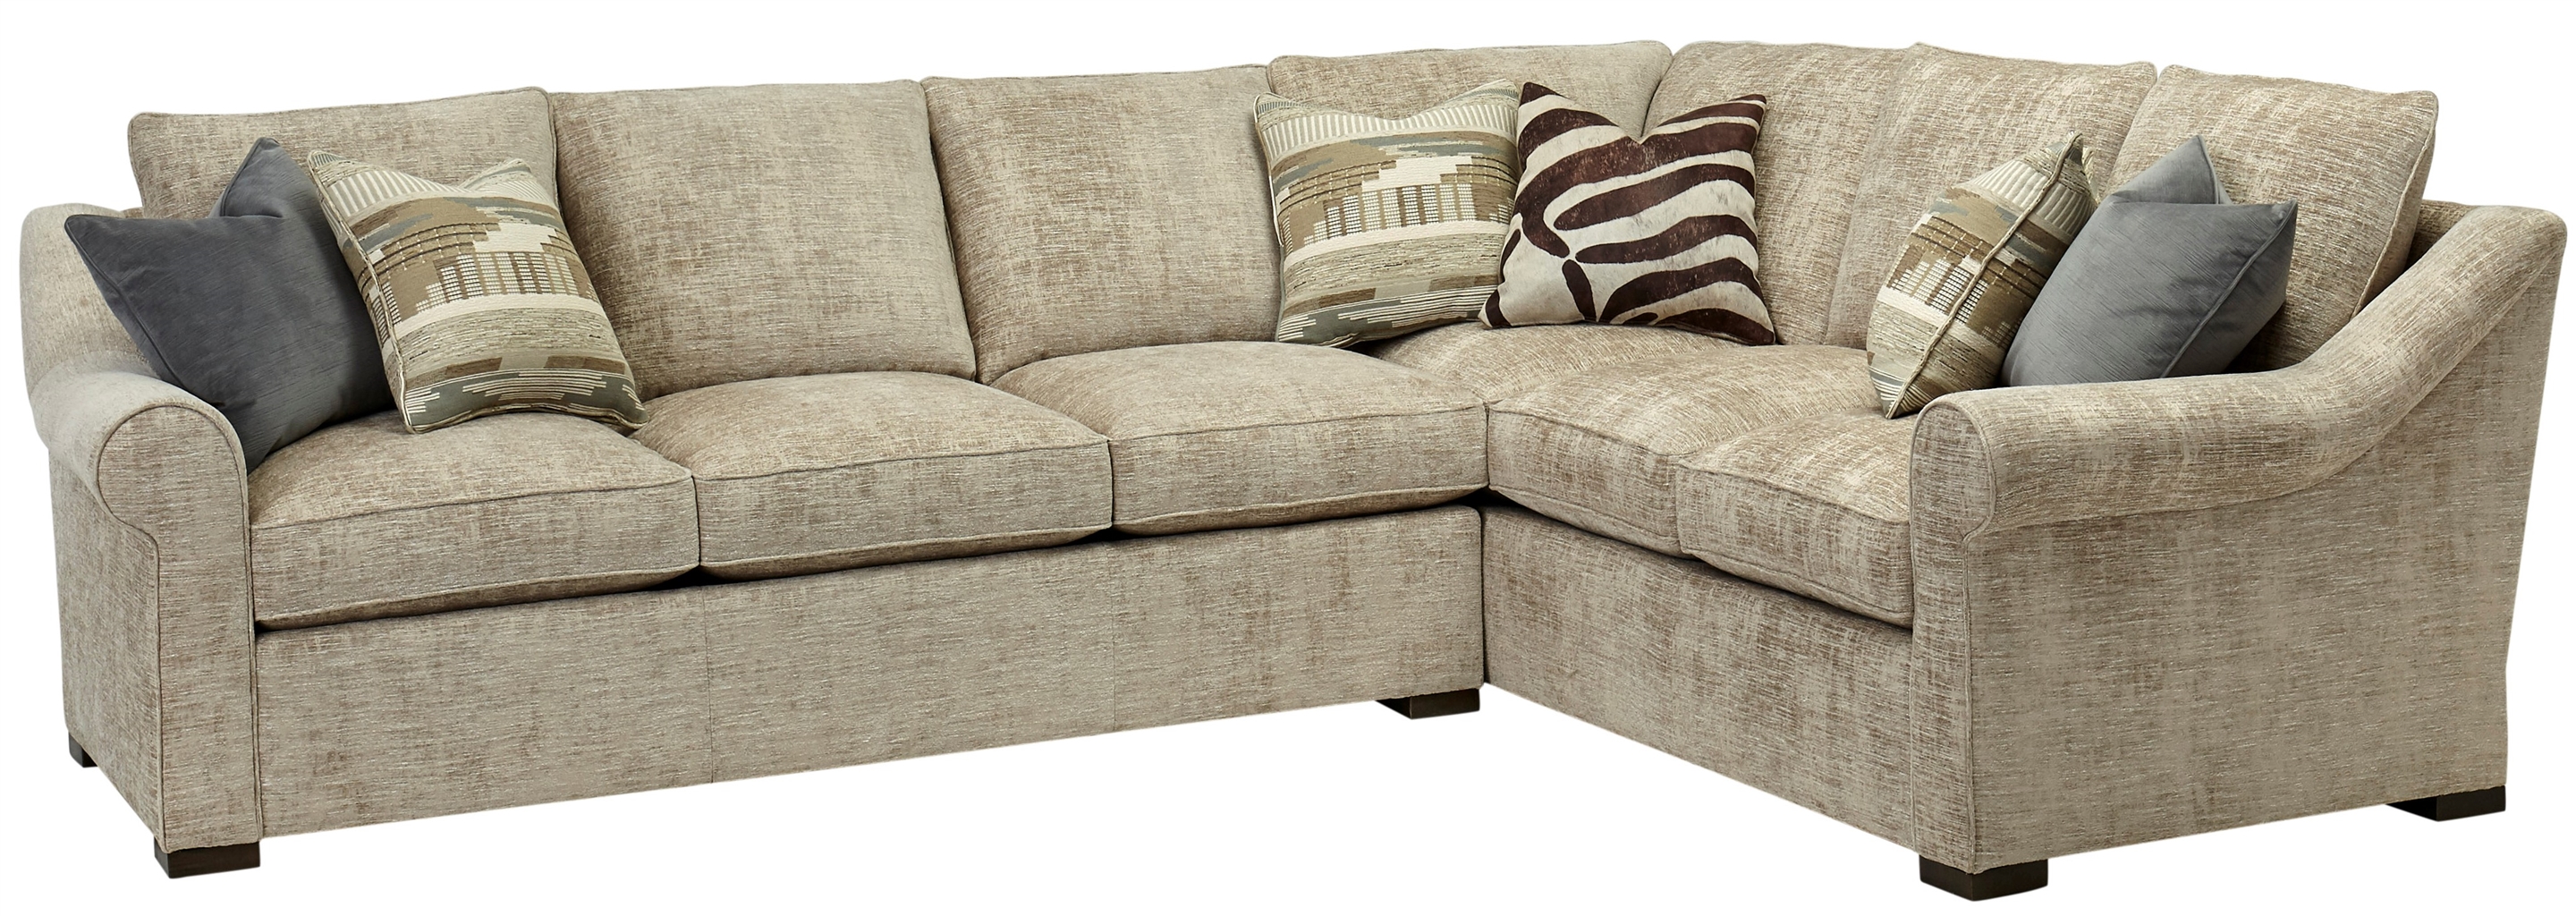 Luxury Leather & Upholstered Furniture Contemporary style sectional. High end furnishings. 6556